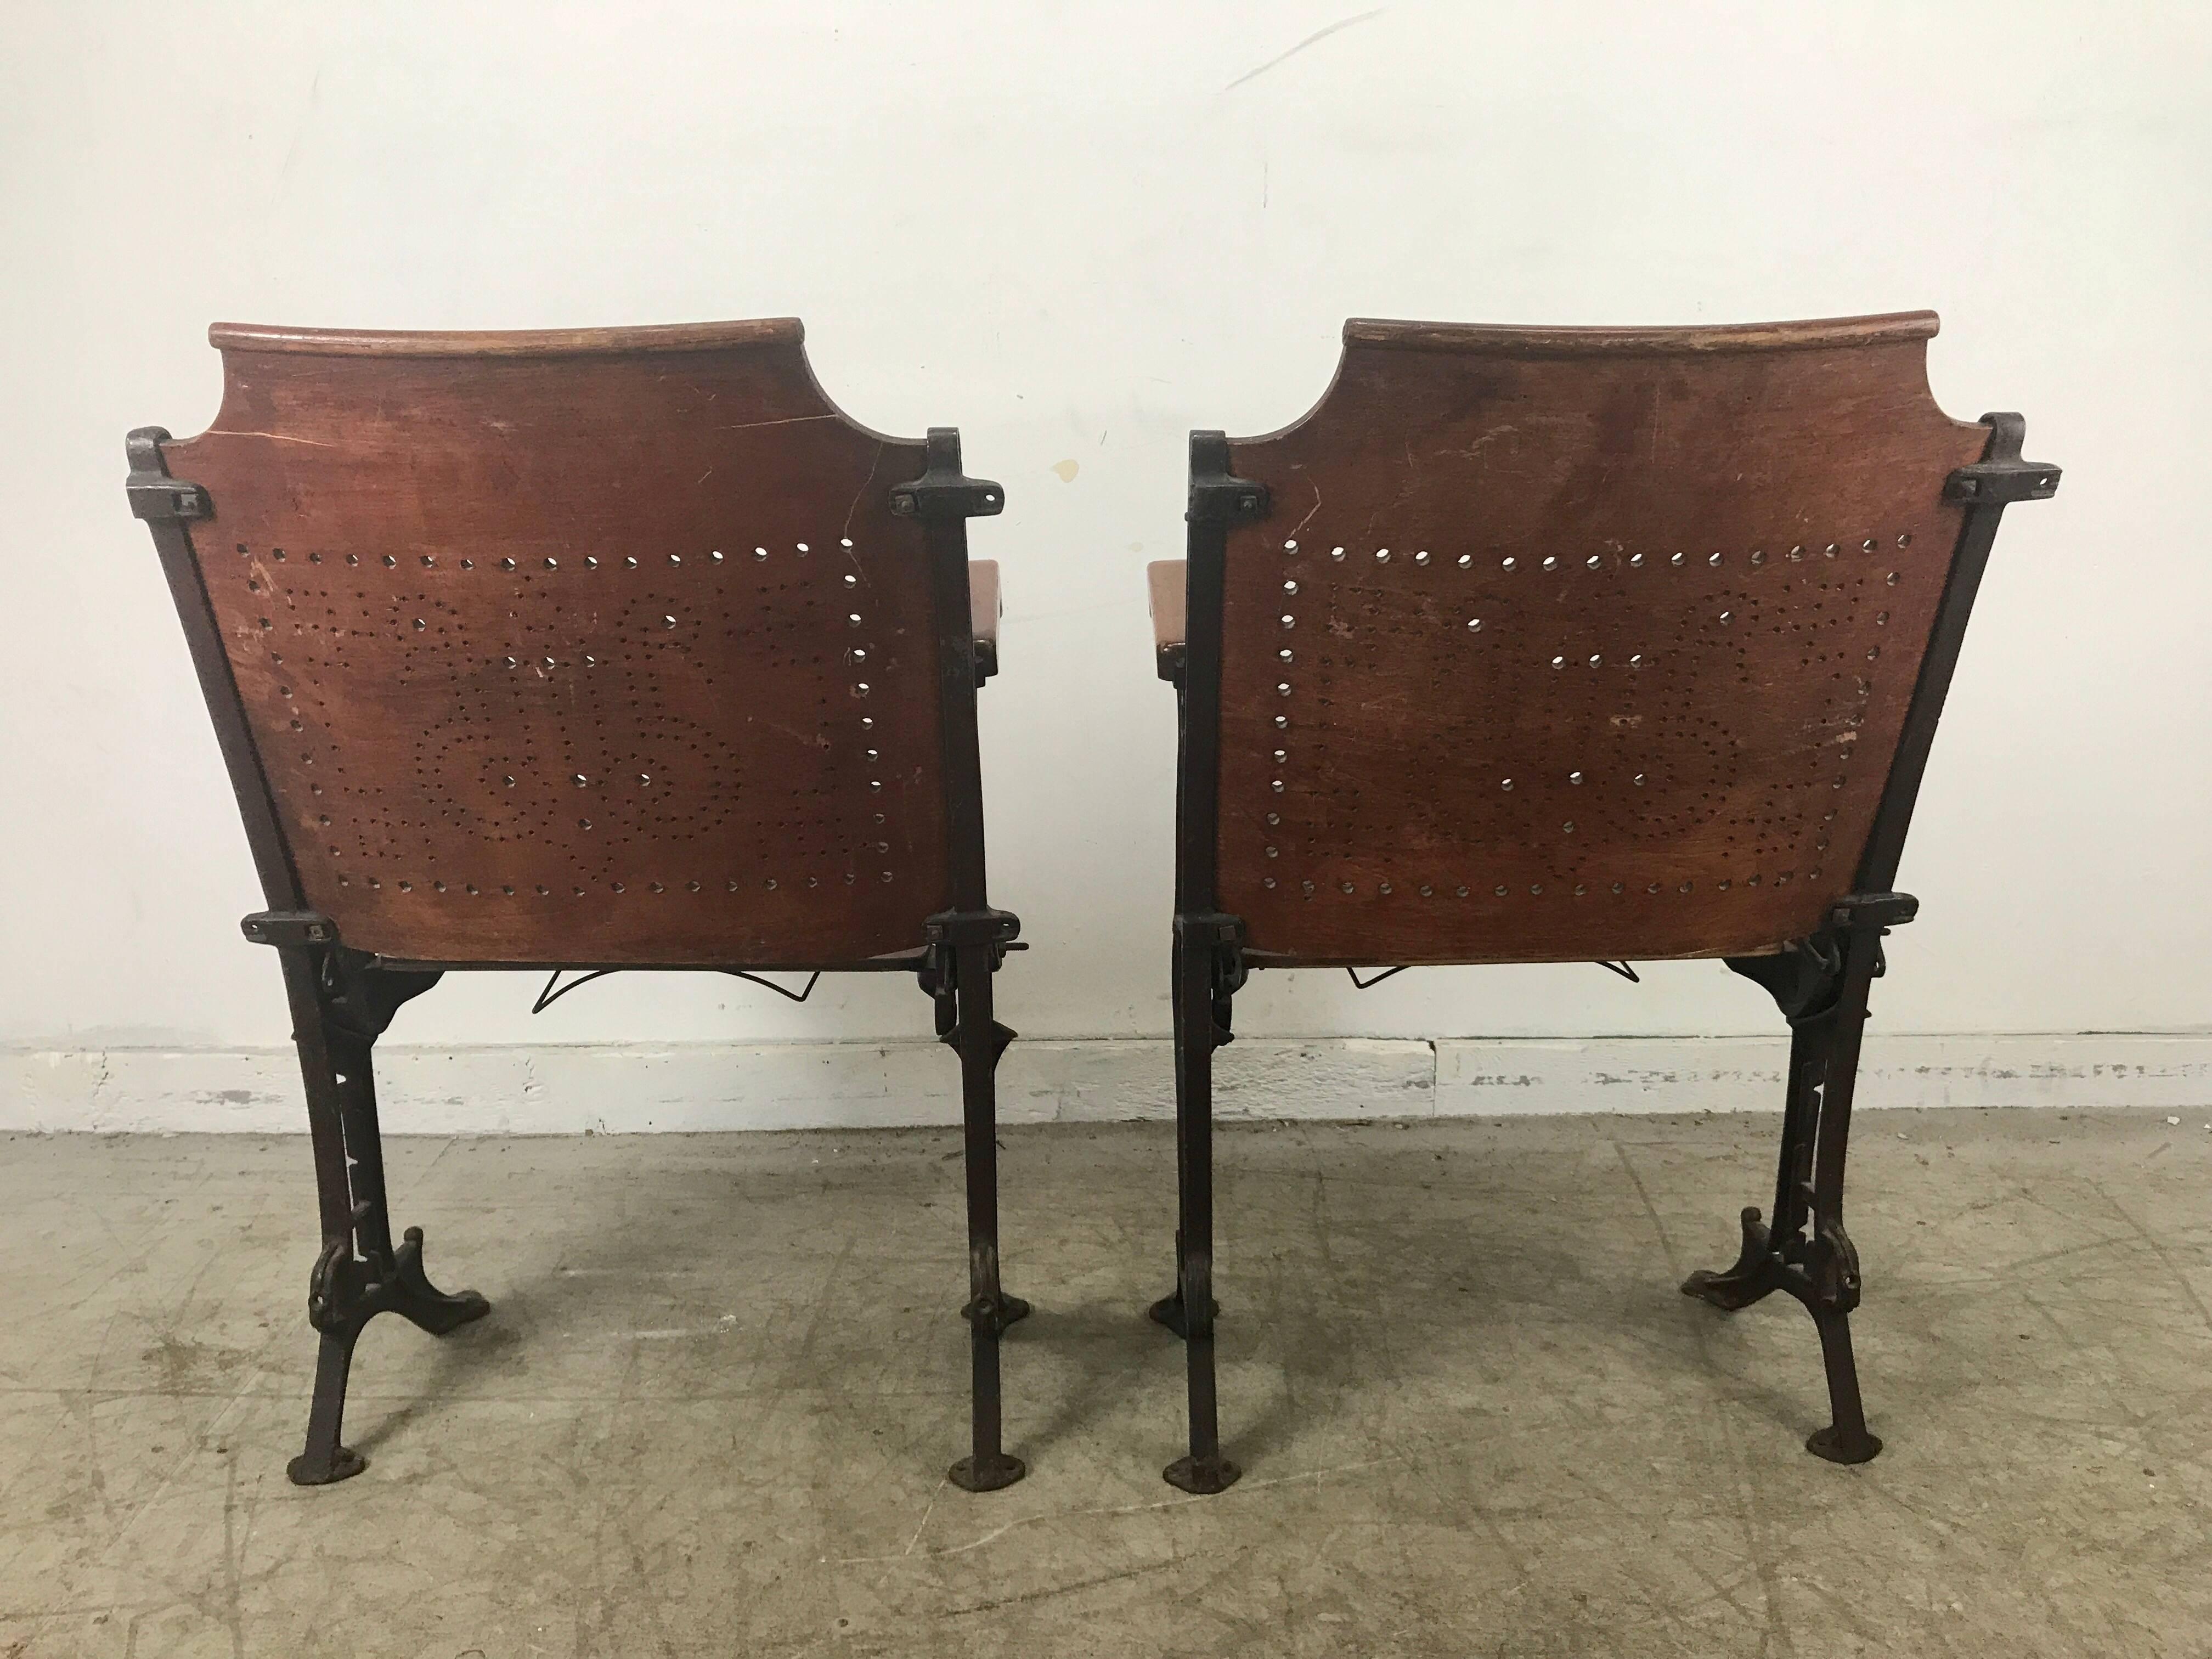 Early Cast Iron and Wood Theater or Opera Chairs A.H. Andrews, circa 1886 1